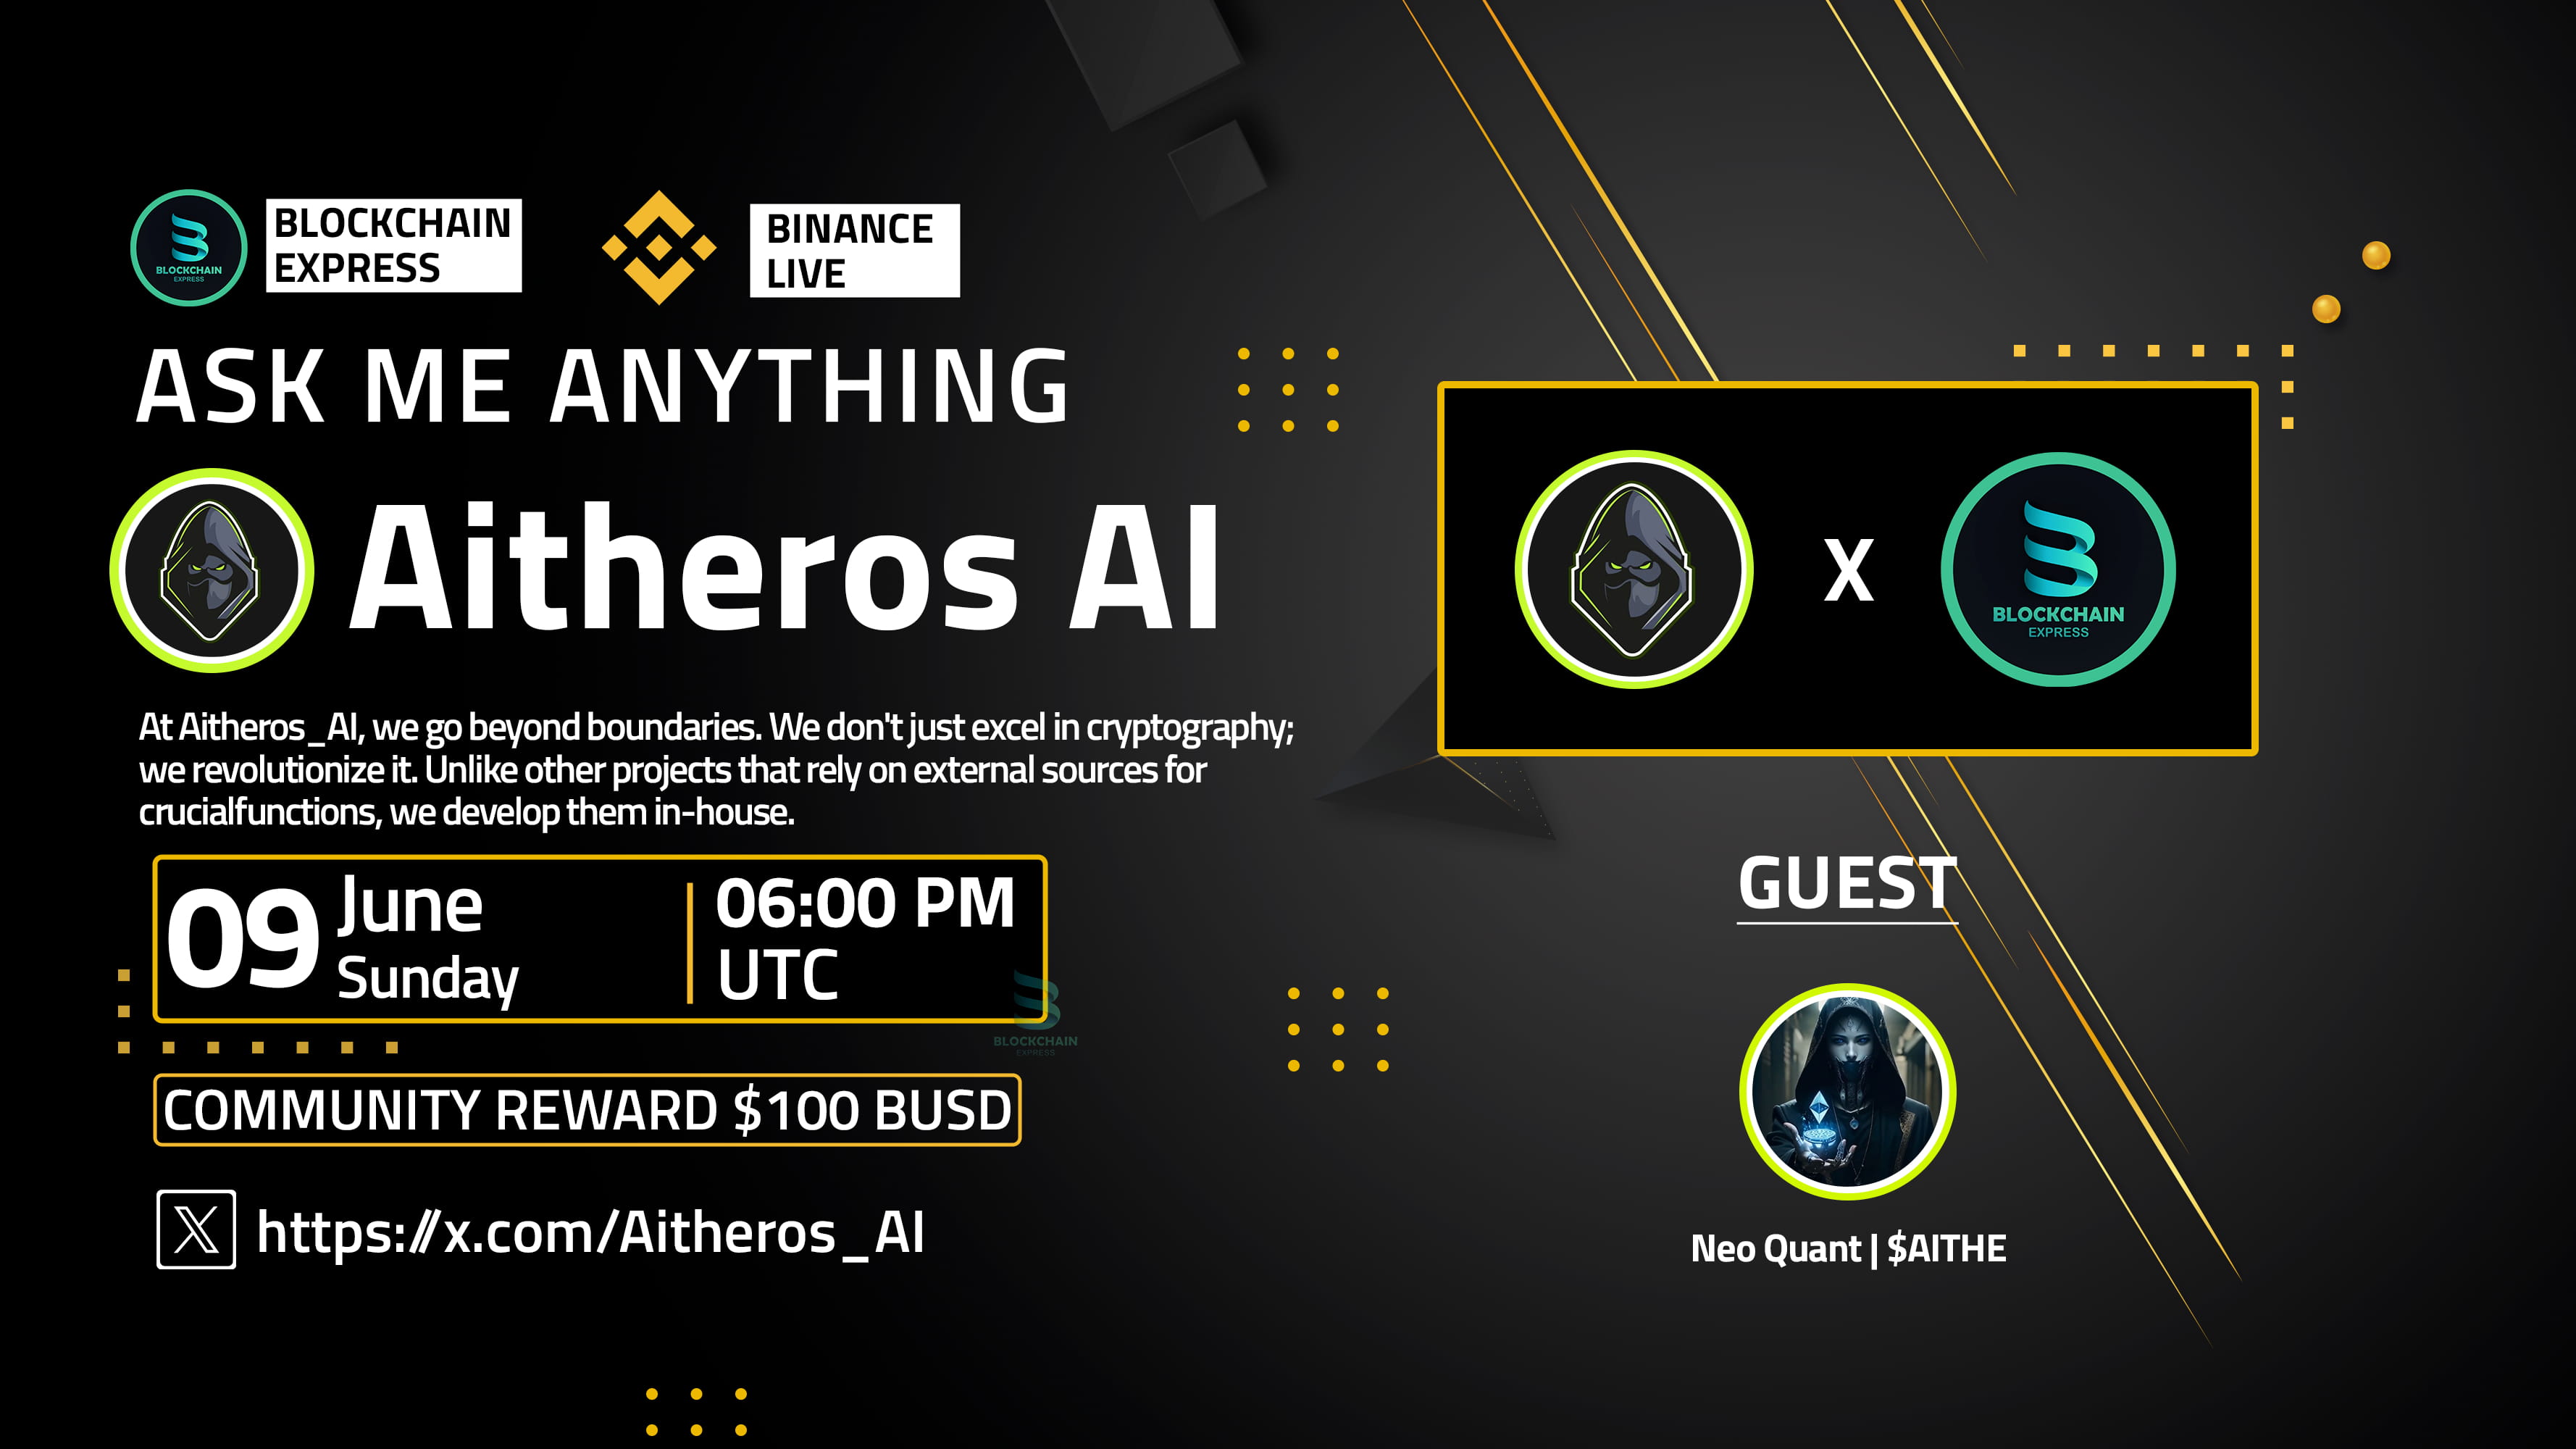 ₿lockchain Express will be hosting an AMA session with" Aitheros AI "